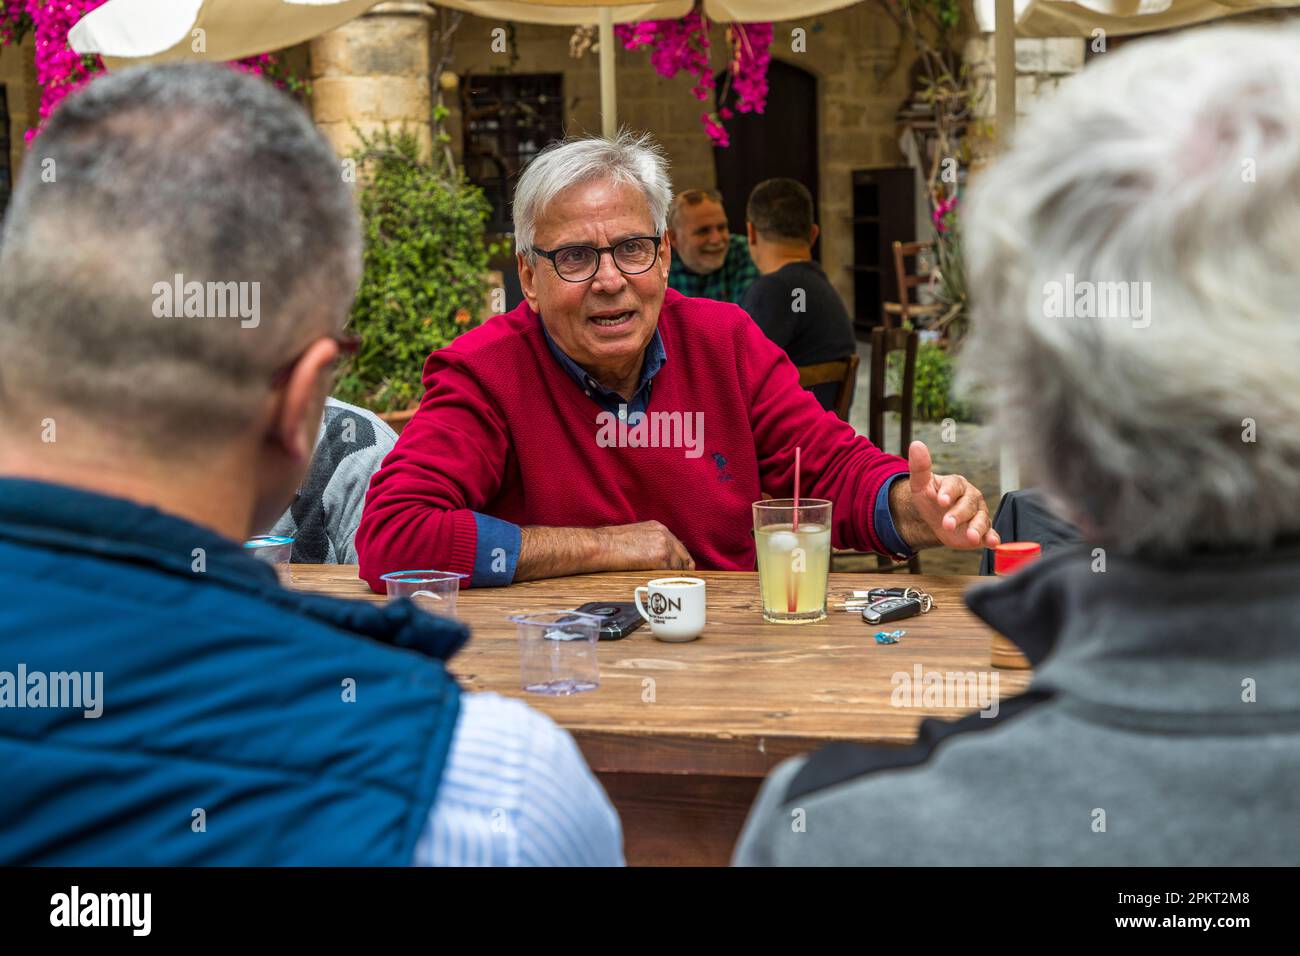 Andreas Paralikis, Cypriot Greek and co-initiator of the Coffee Club. Andreas moderates the weekly meeting, introduces the newcomers and ensures that a relaxed and lively exchange unfolds at the informal gathering in the Caravanserai Büyük Han of Nicosia, Cyprus Stock Photo